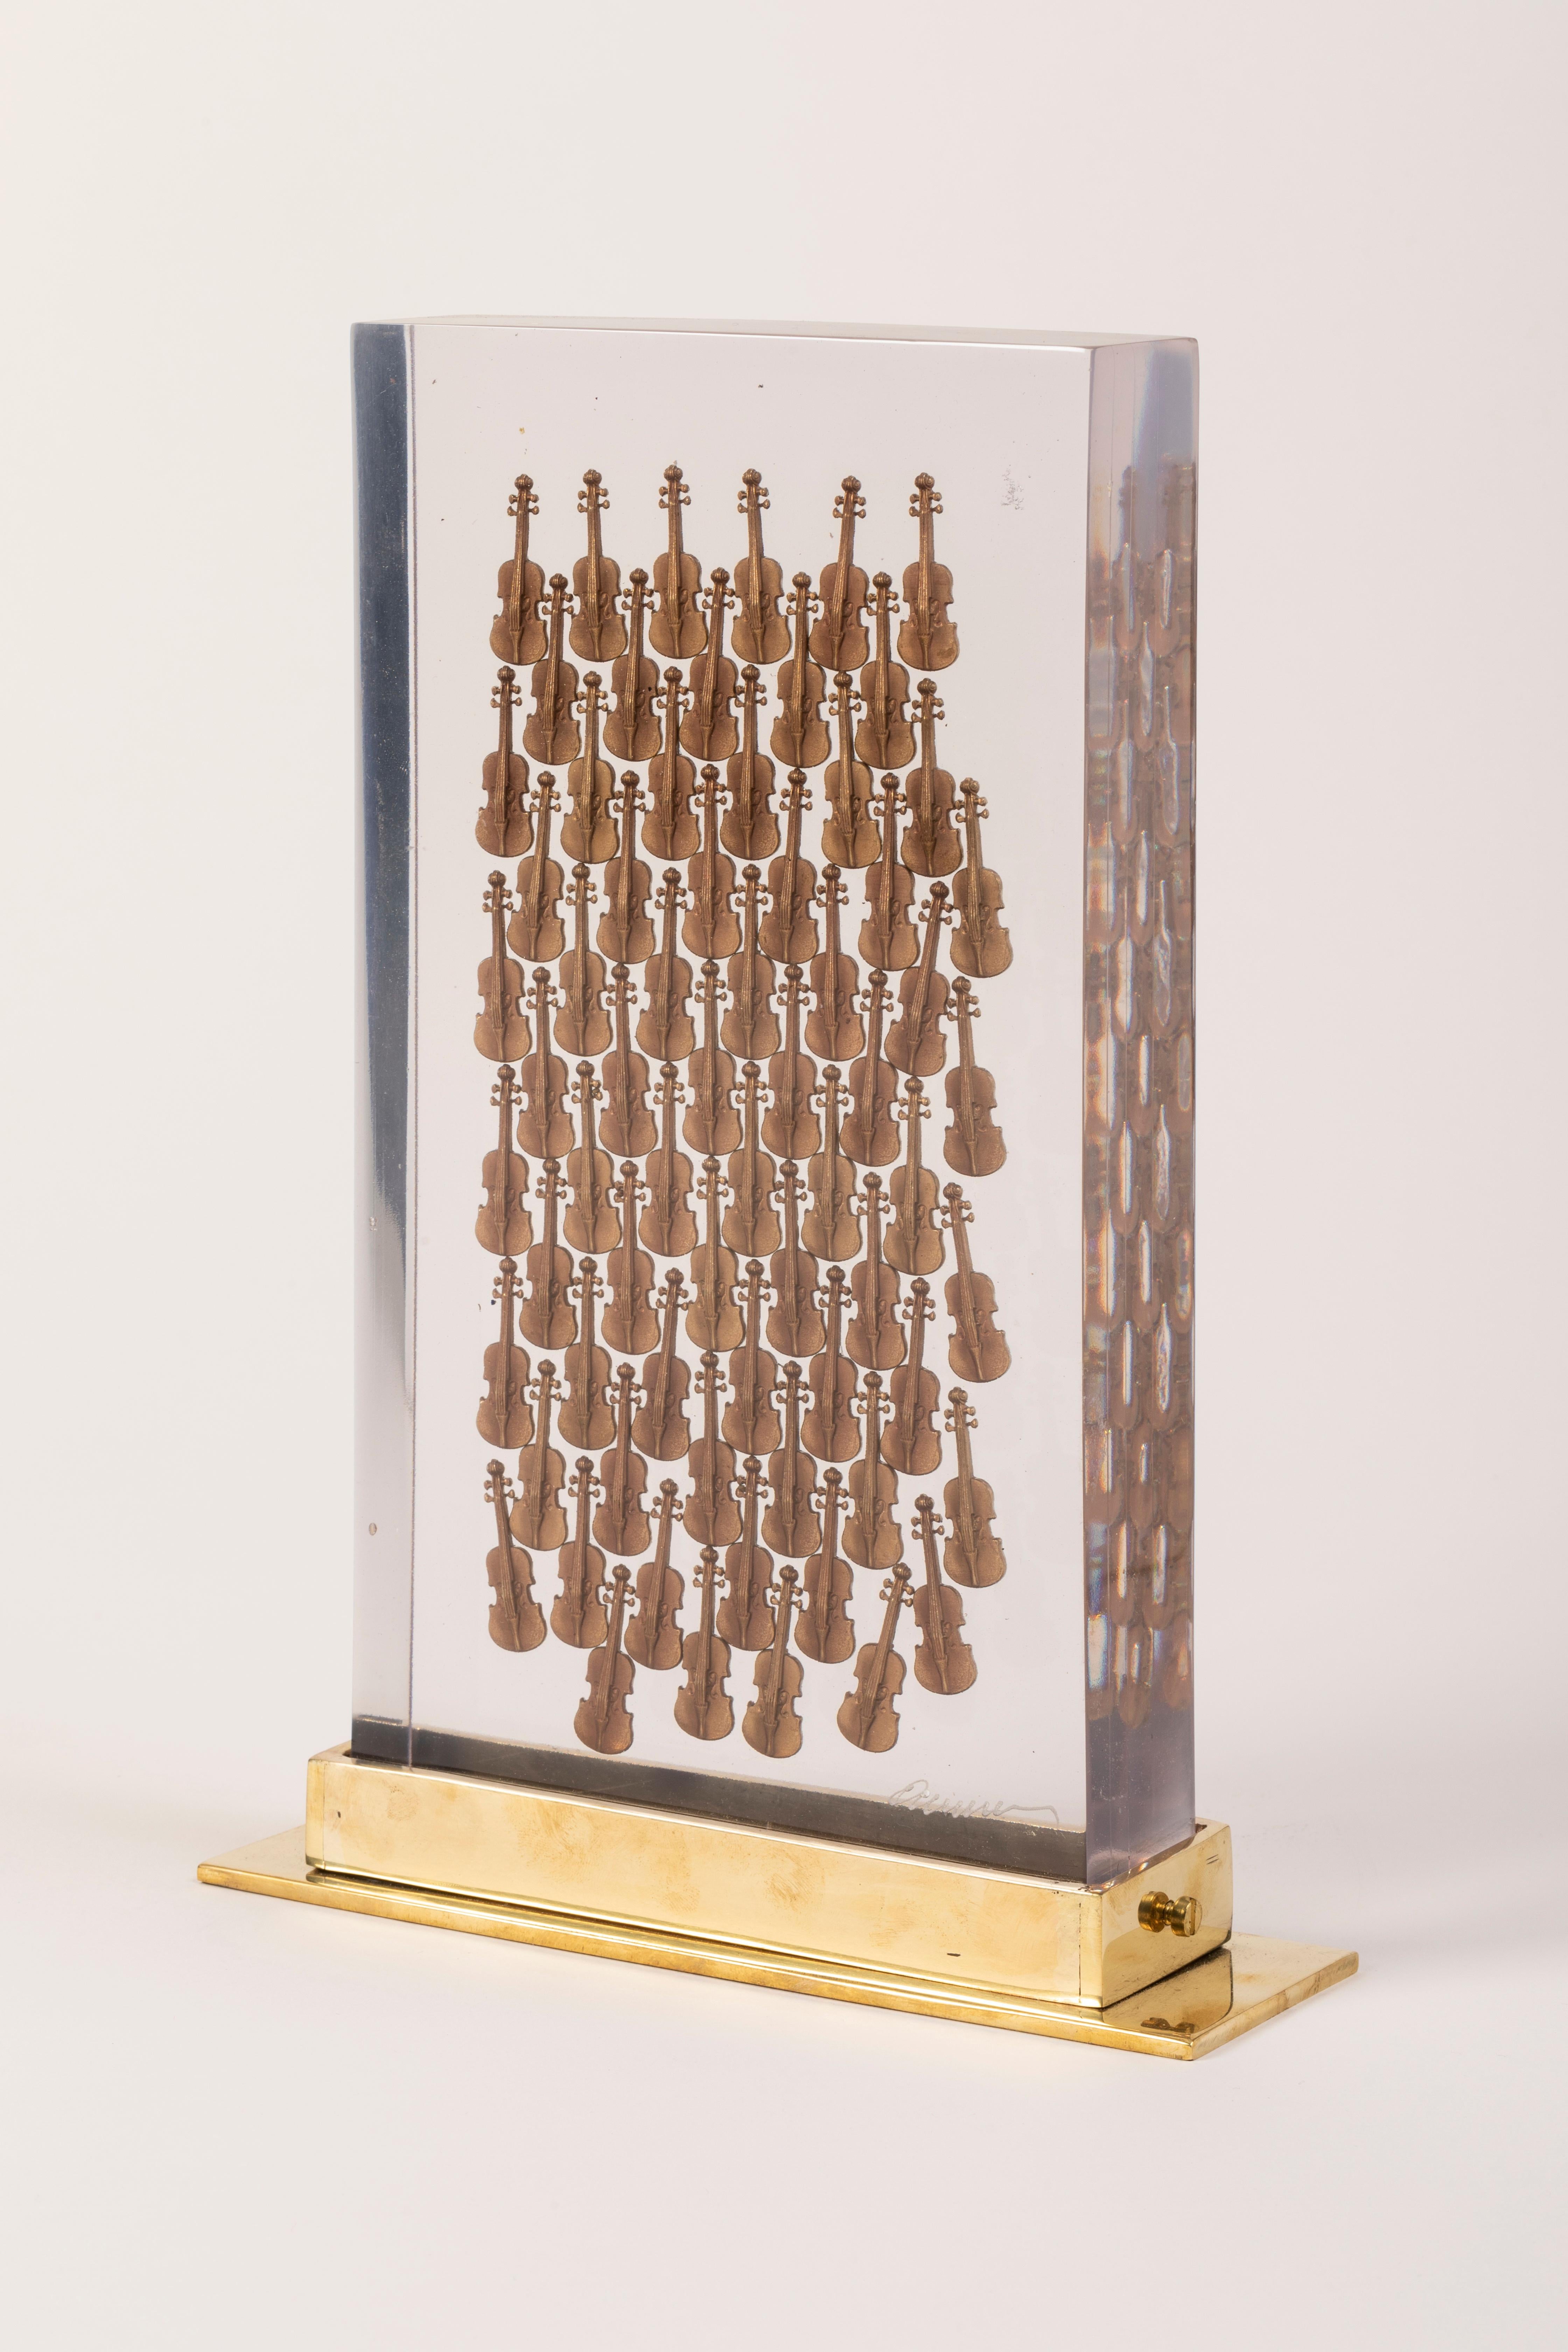 2004
Accumulation of miniature bronze violins embedded in polyester resin.
Edition of 99 copies + 20 AP + 20 HC + 30 I/XXX.
Signed and numbered in resin.
Registered in Denyse Durand-Ruel Archives under Nr 9530.

Arman is a Franco-American artist